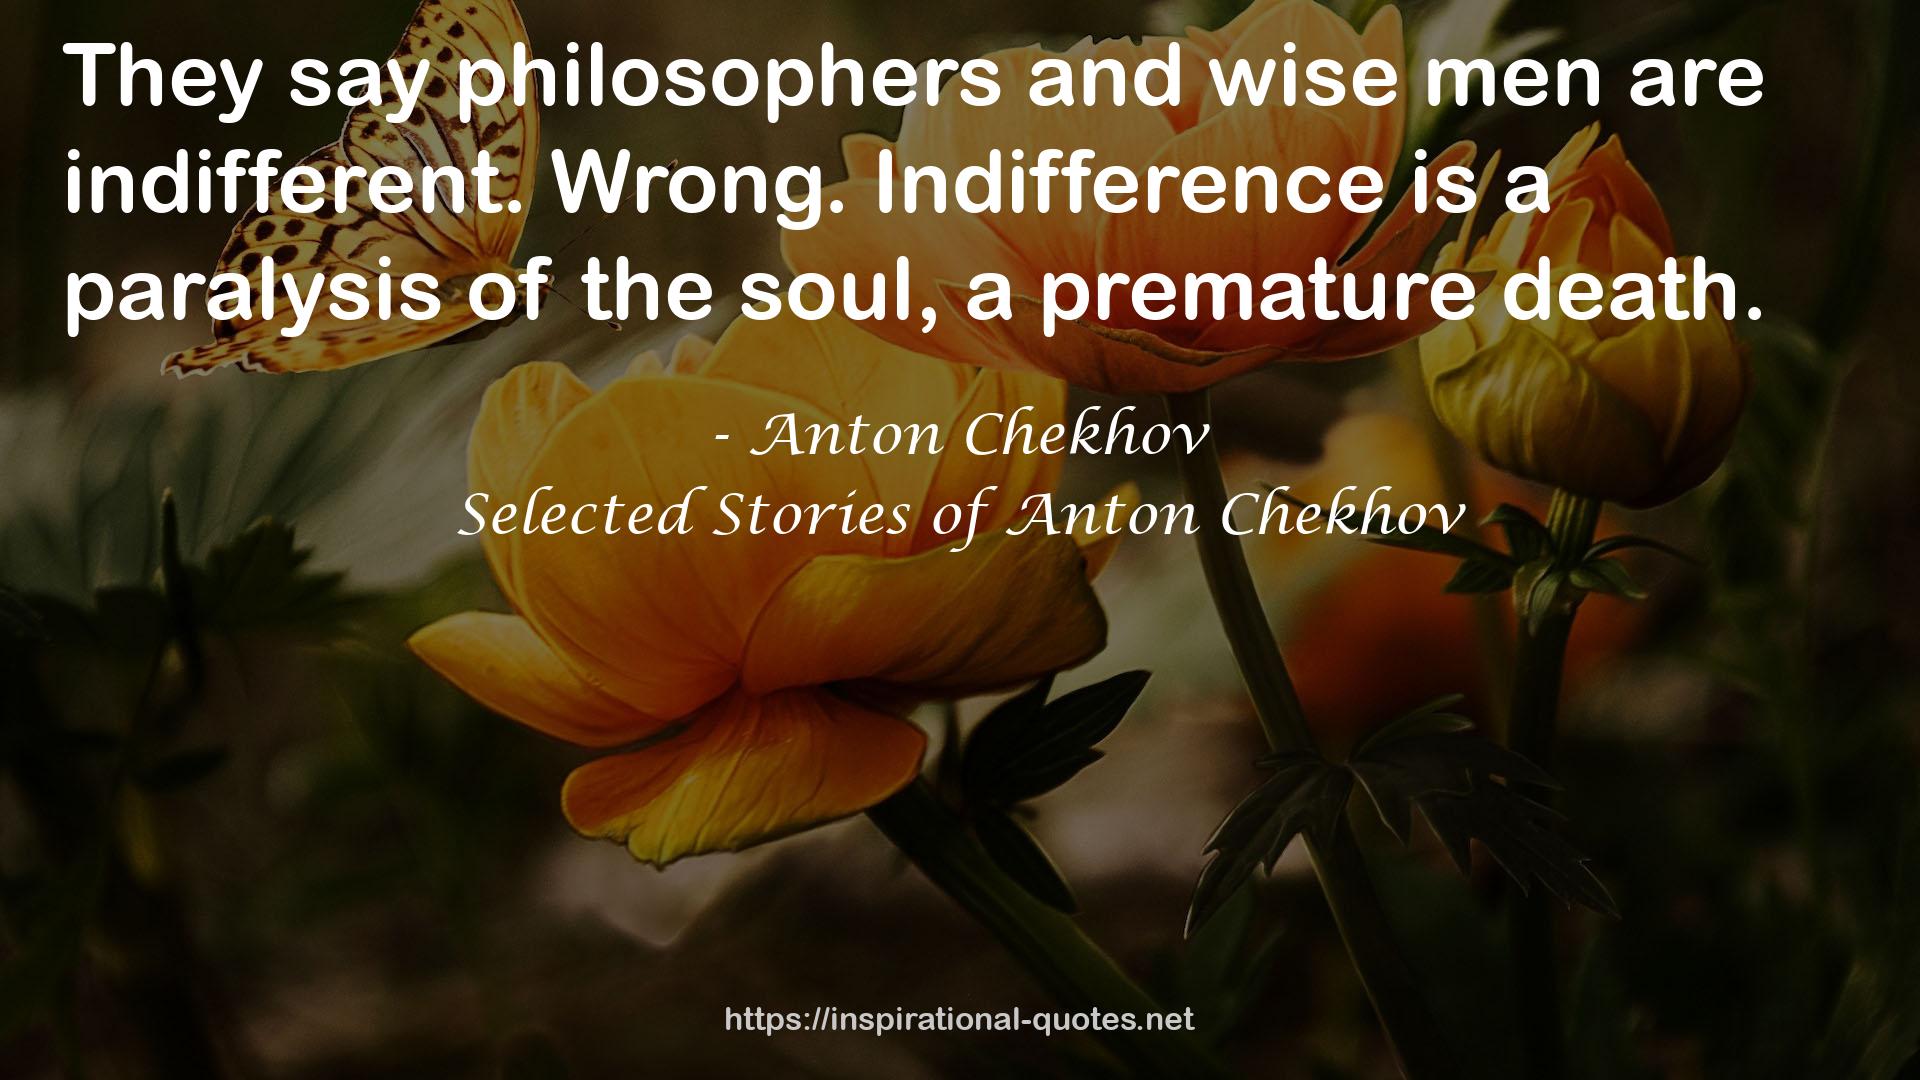 Selected Stories of Anton Chekhov QUOTES